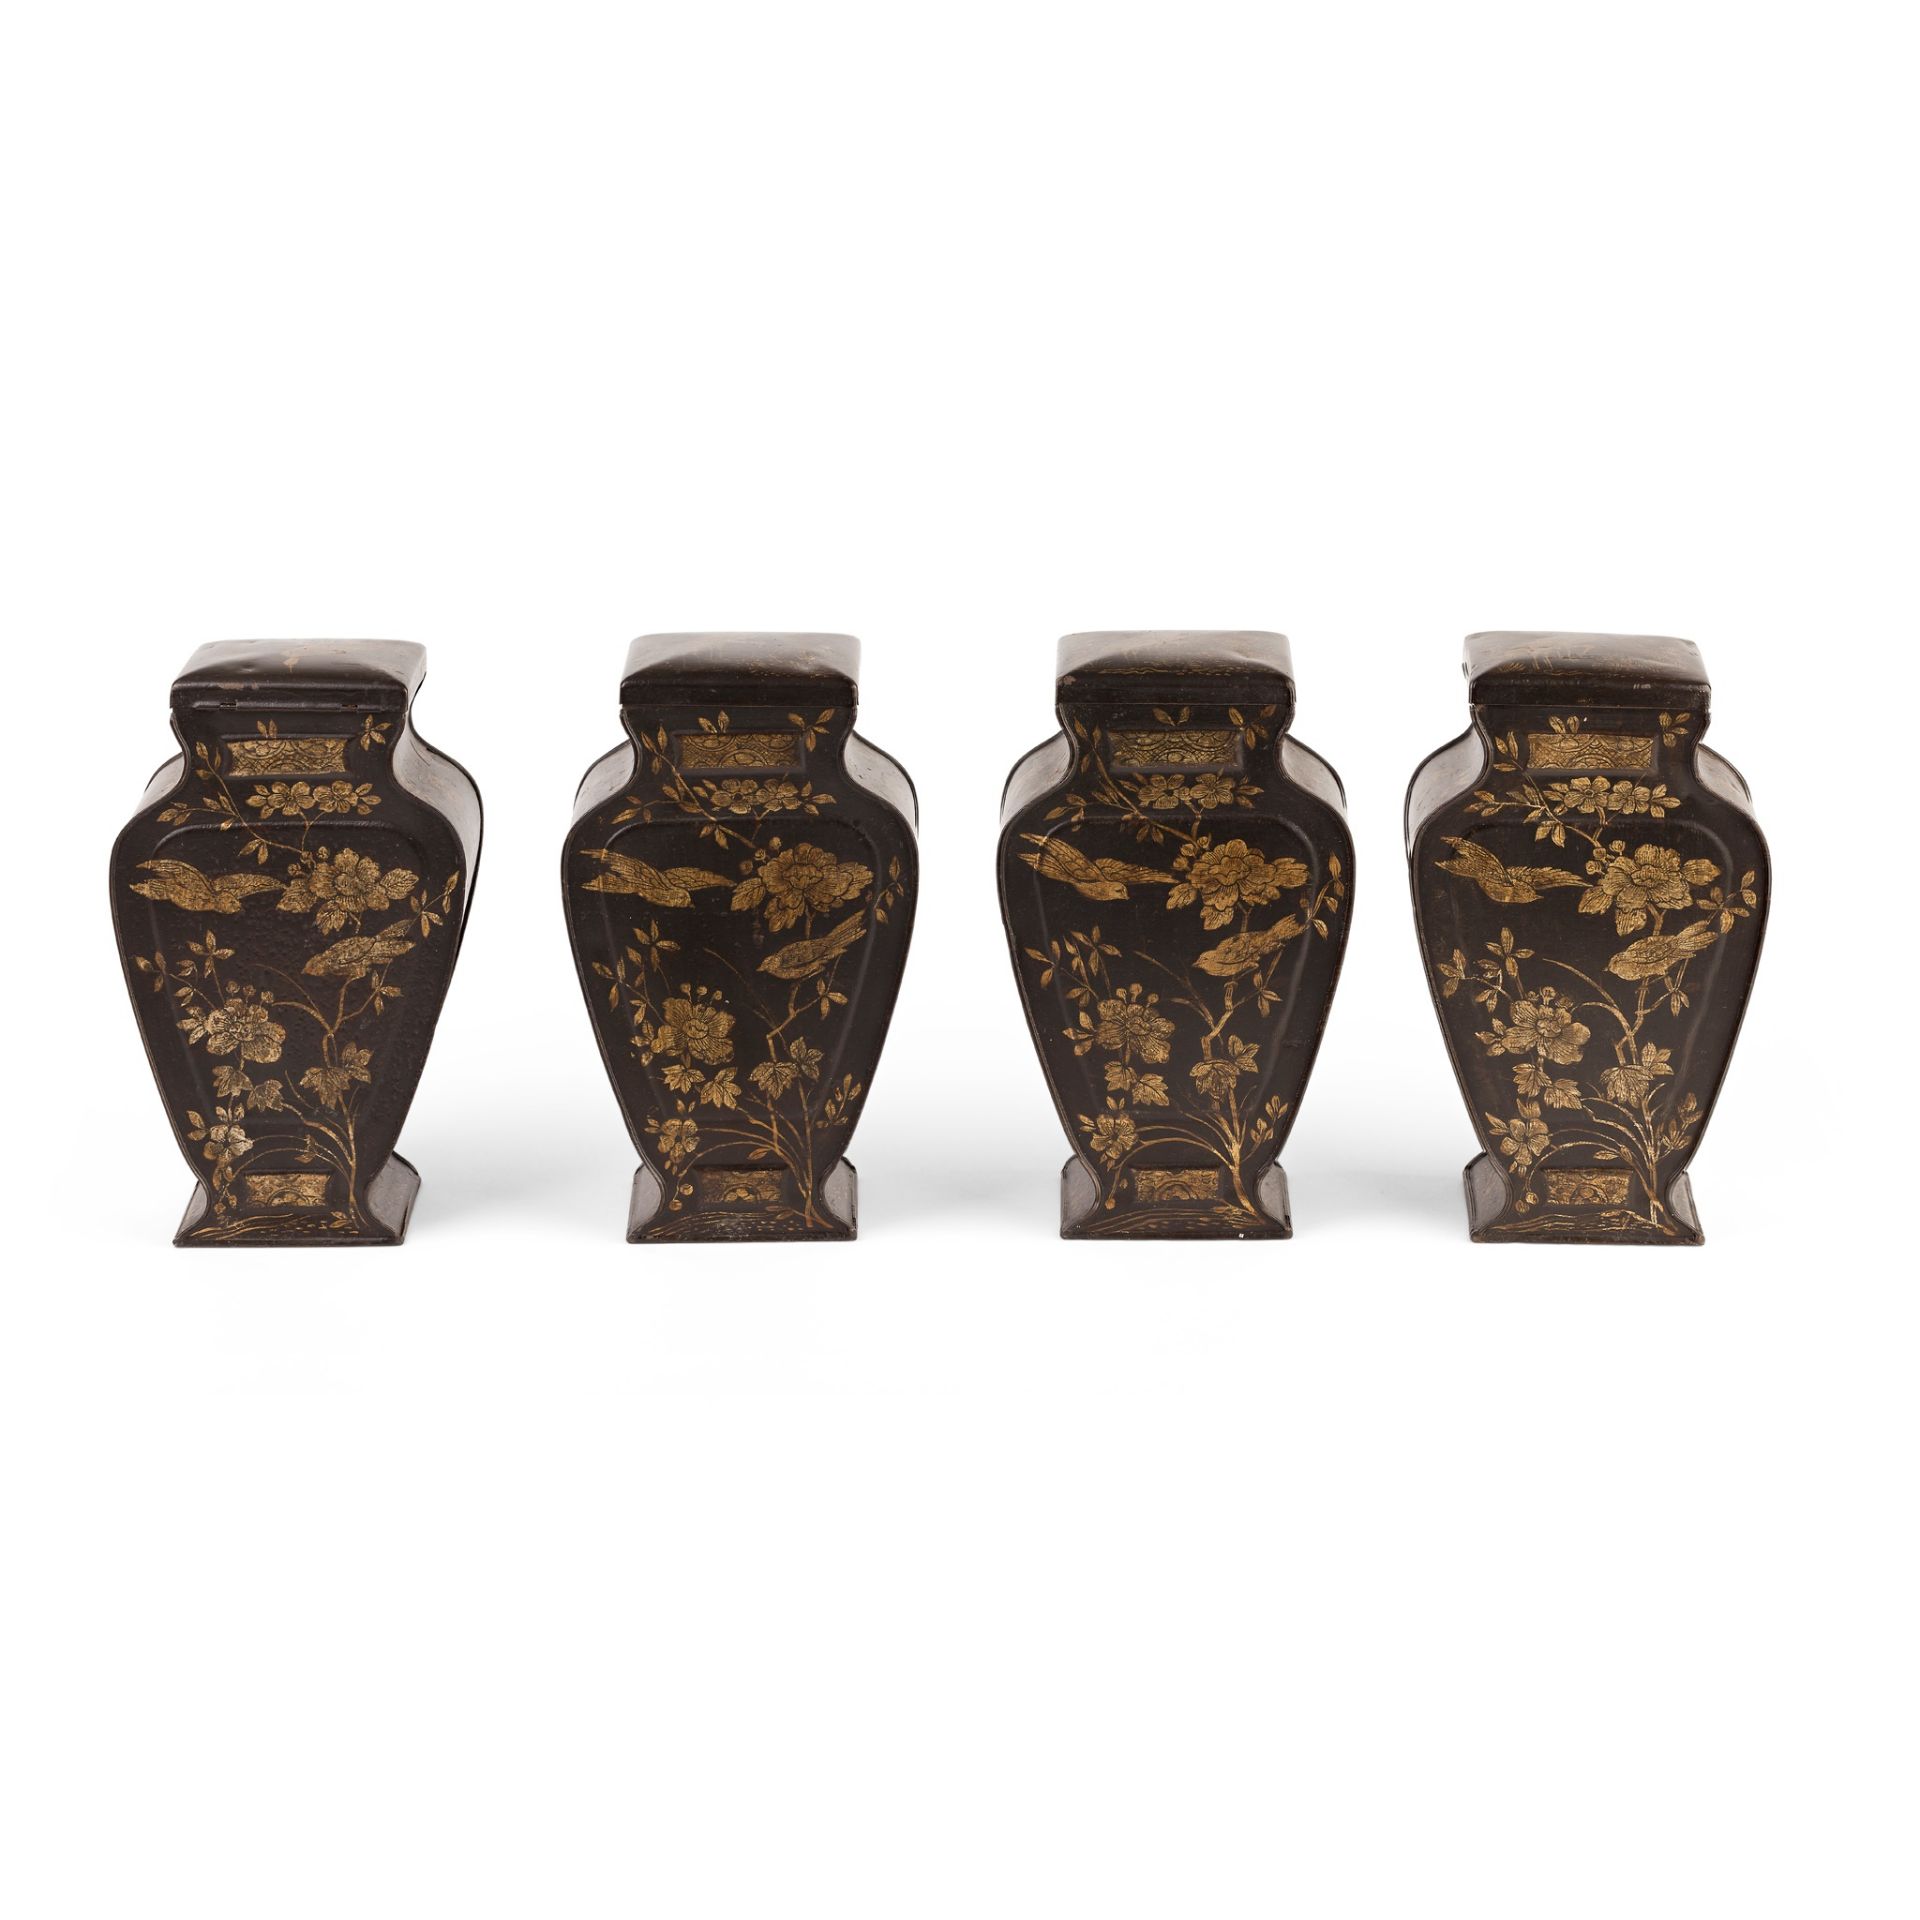 SET OF FOUR JAPANNED TOLEWARE CANISTERS LATE 19TH CENTURY